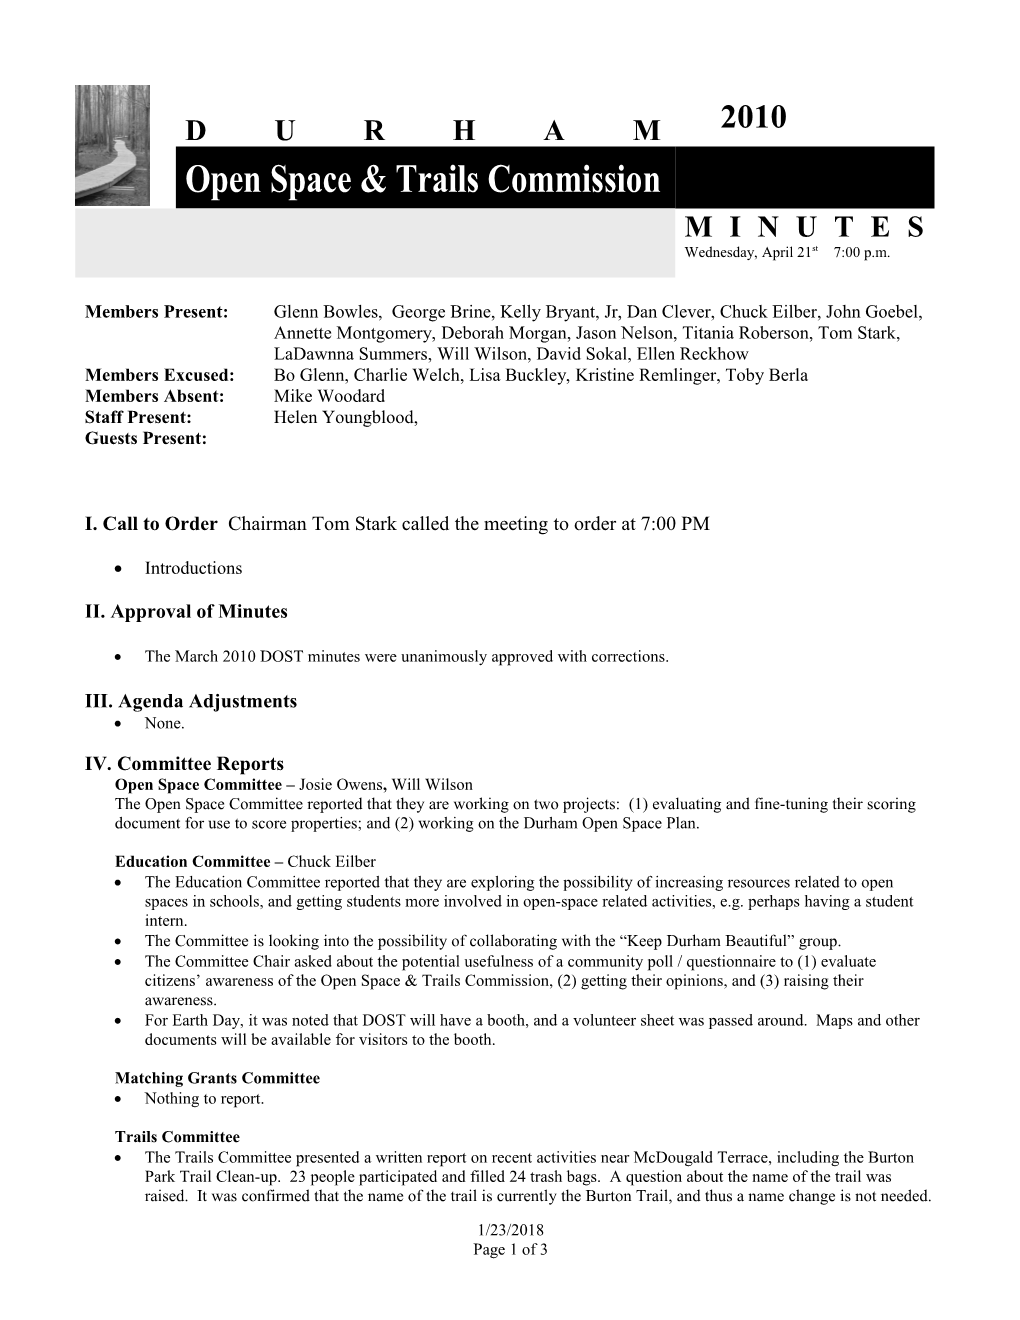 Open Space & Trails Commission